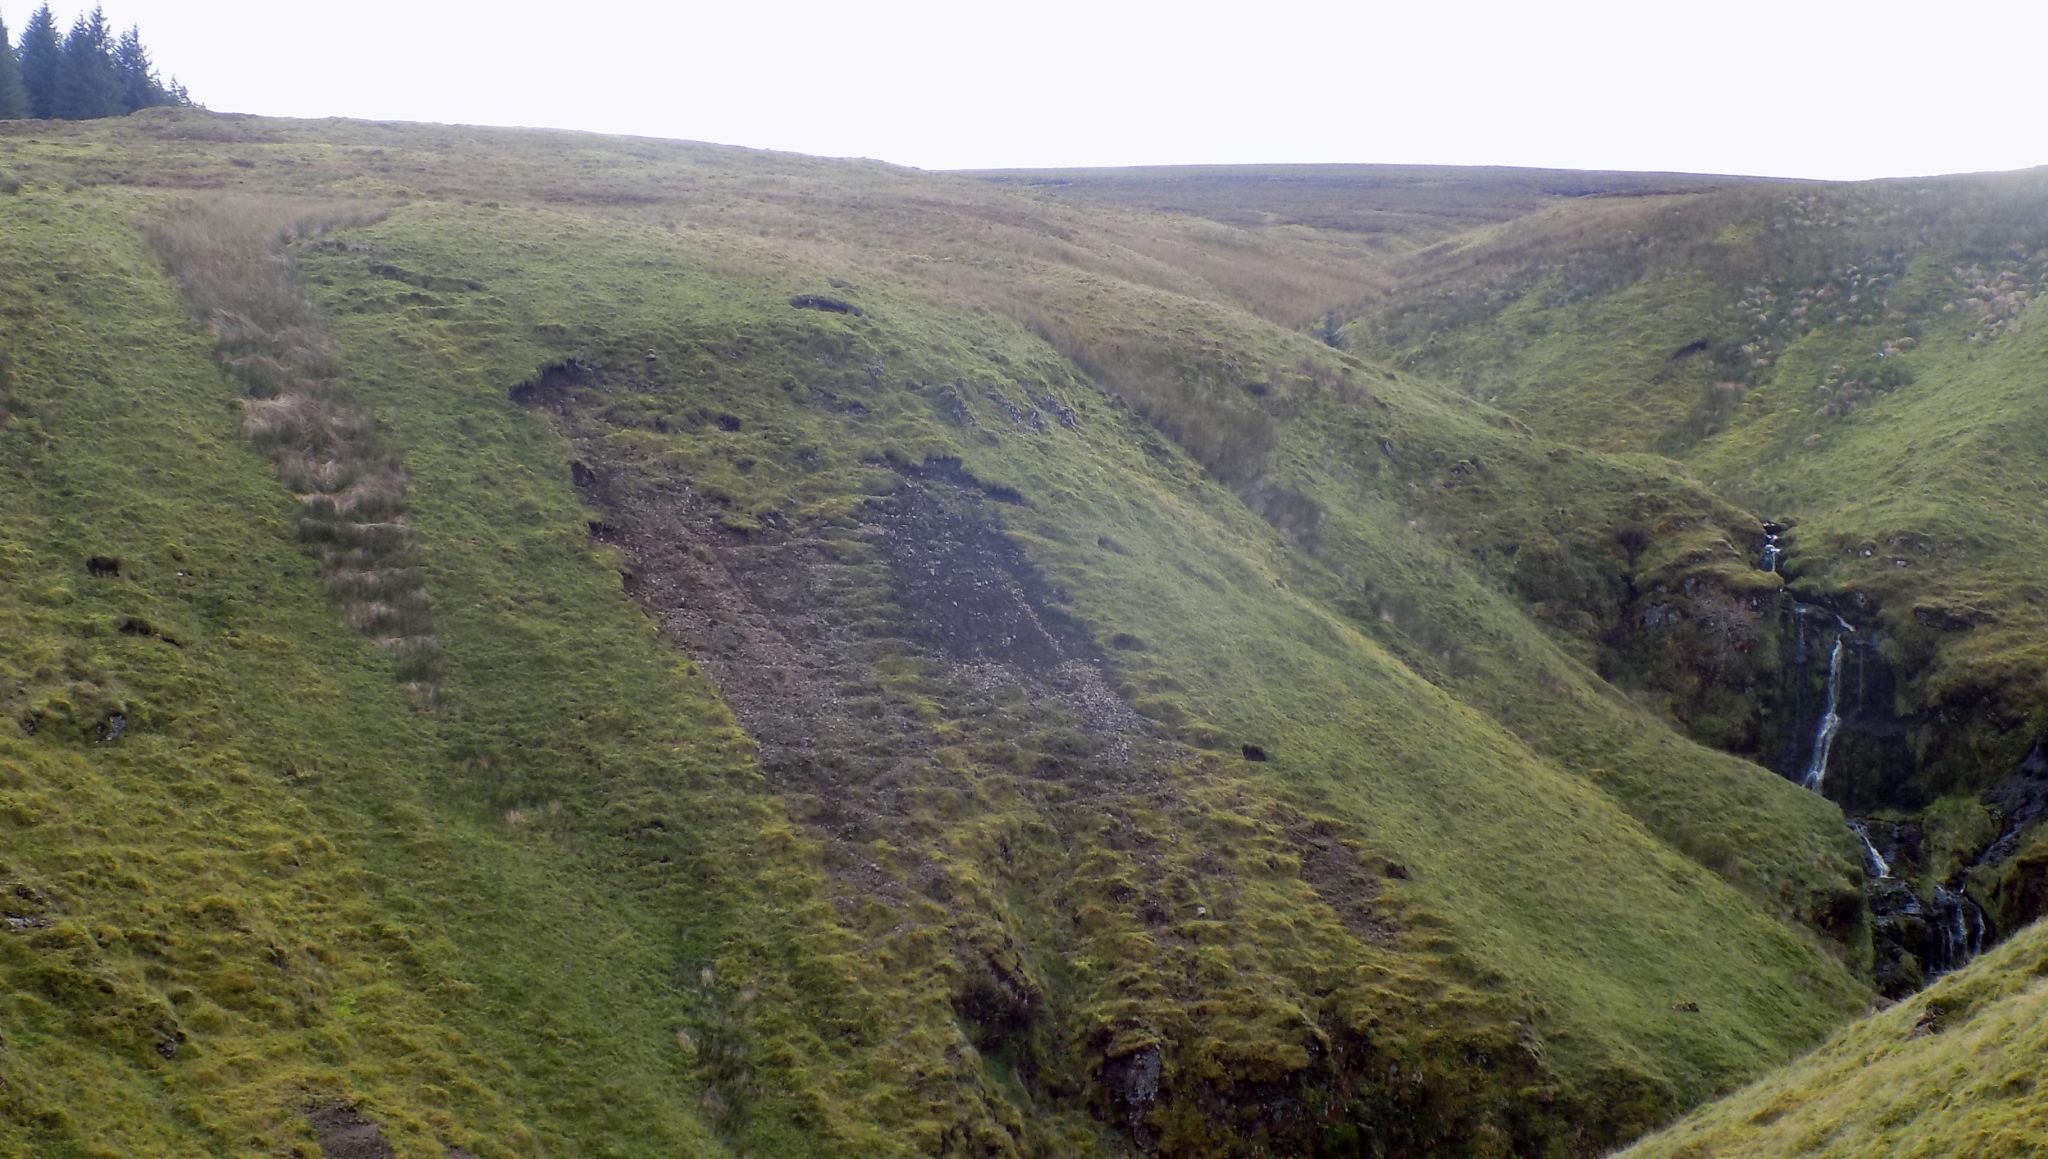 Steep slopes above the waterfalls in the Hole of Kailrine in the Campsie Fells